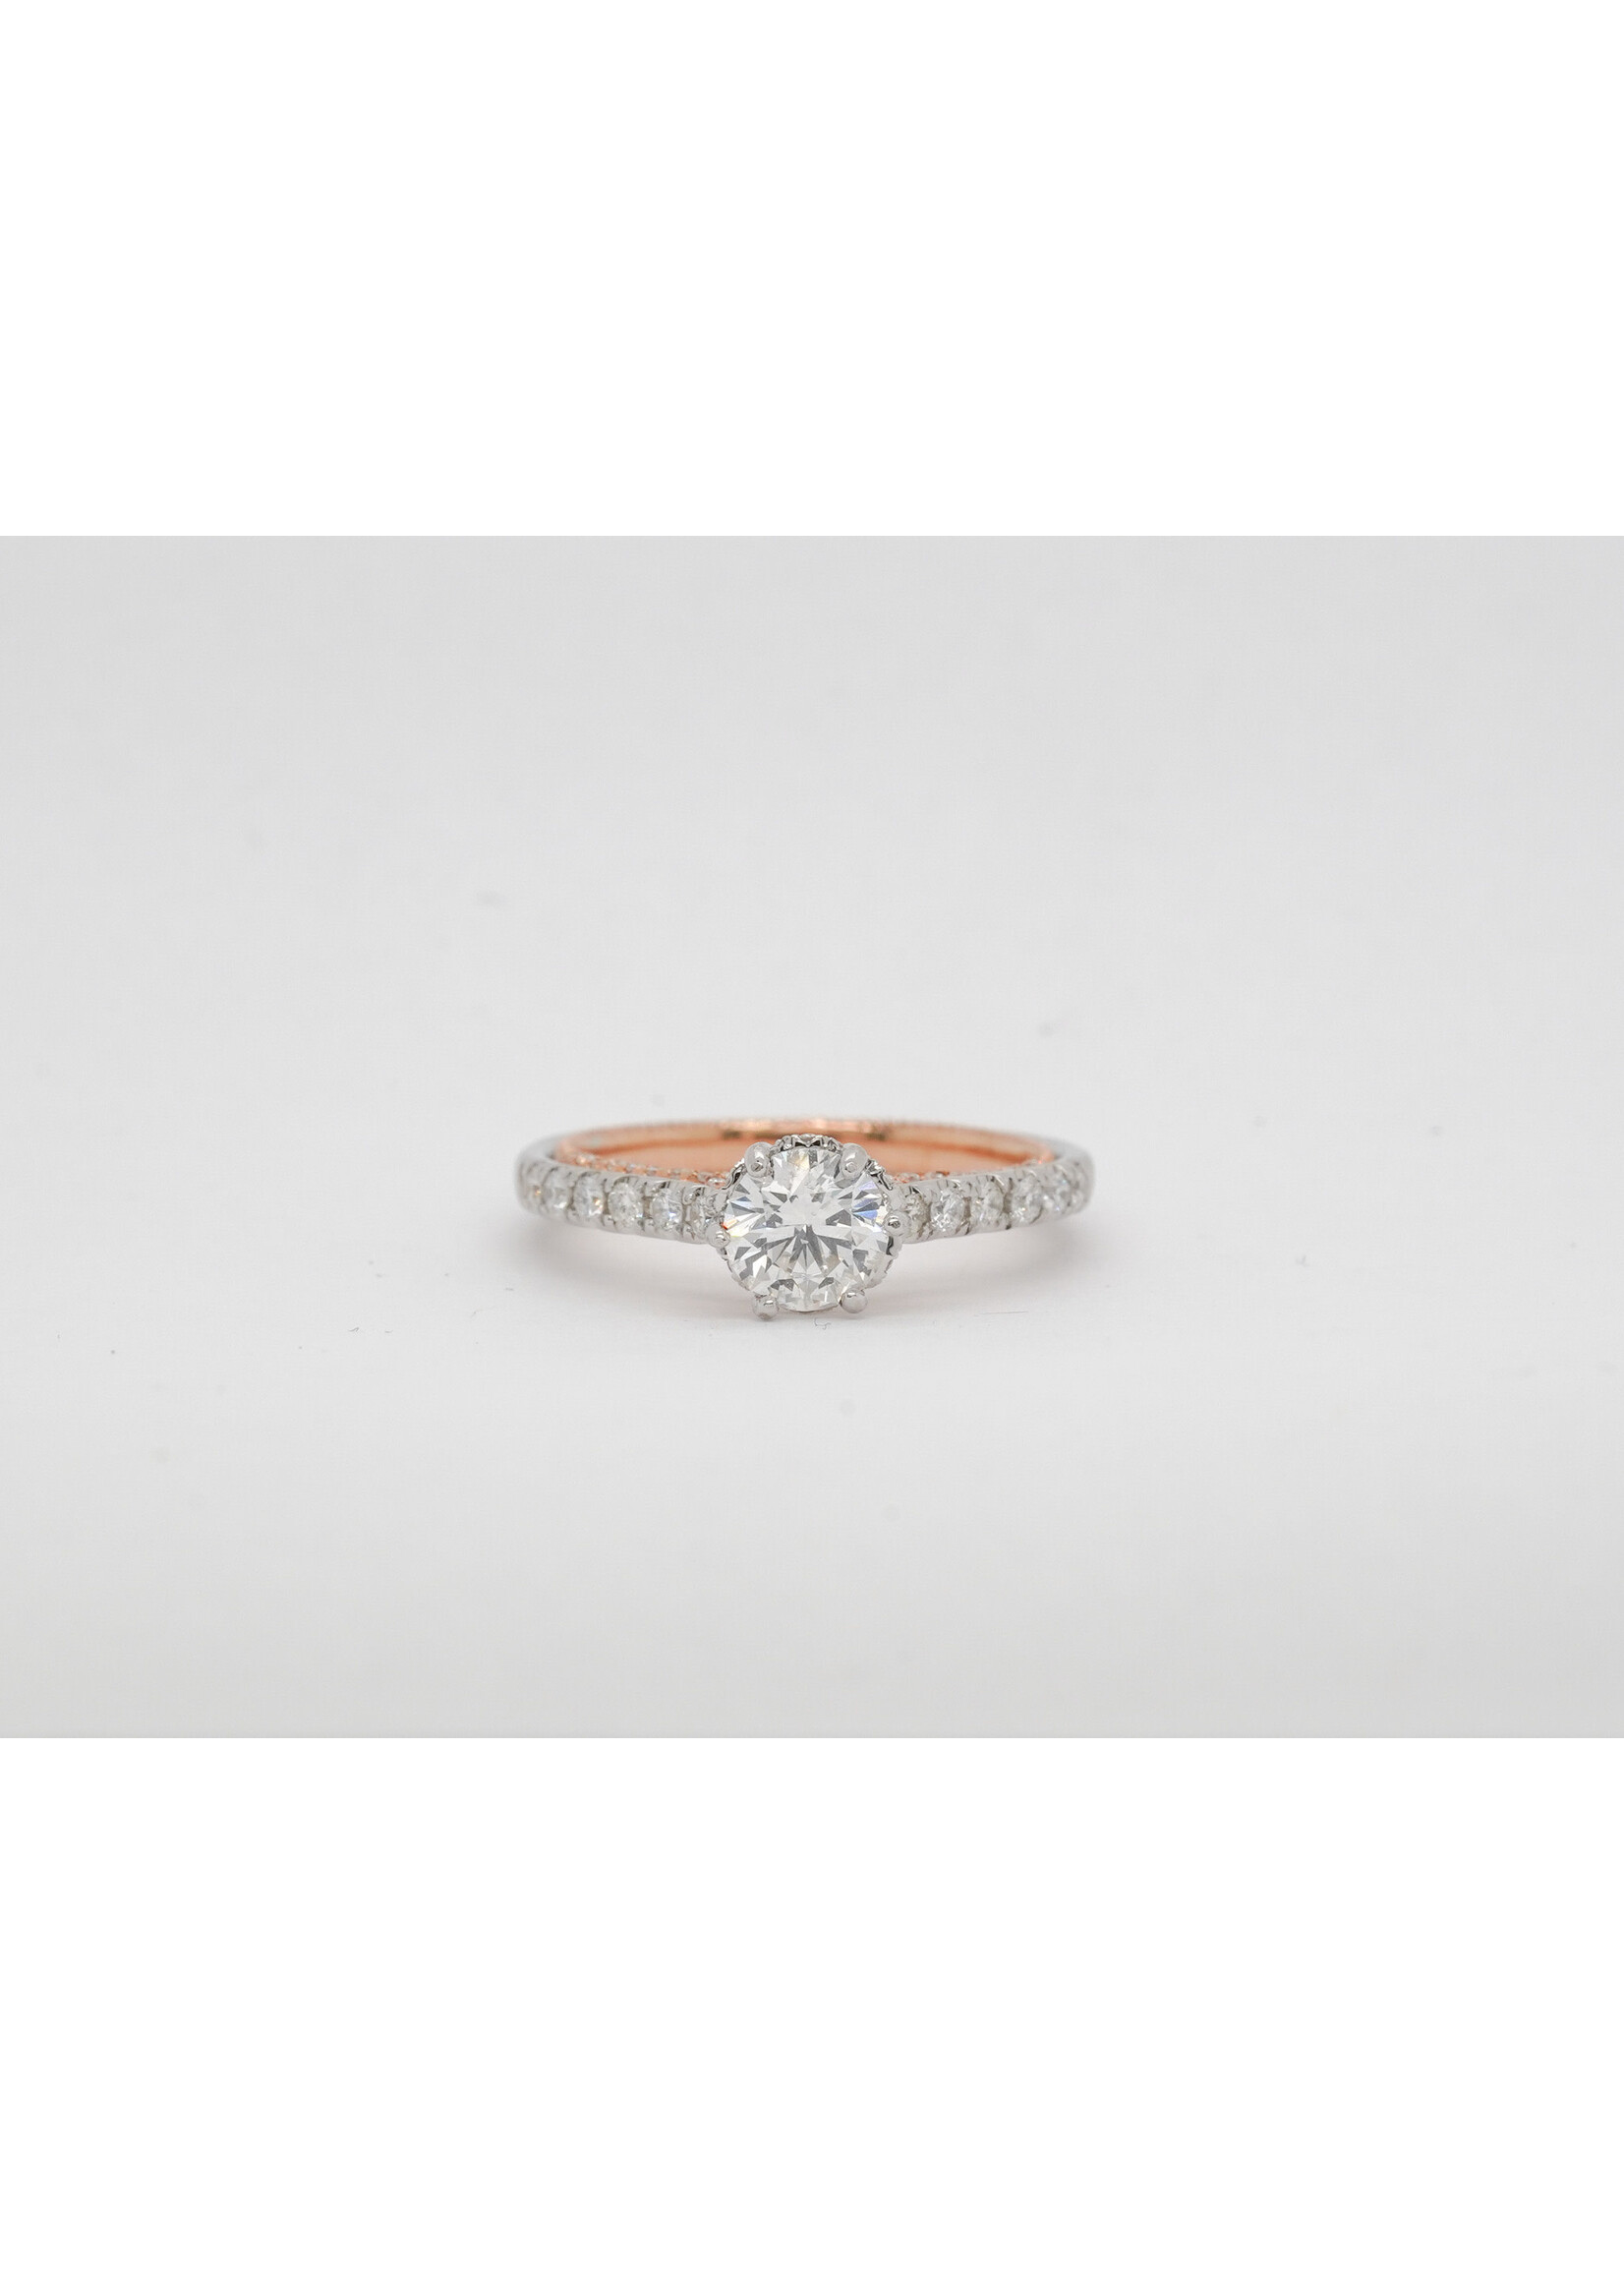 14K Two Tone 2.97g 1.11ctw (.70ctr) F/SI2 Round Diamond Engagement Ring (size 6)